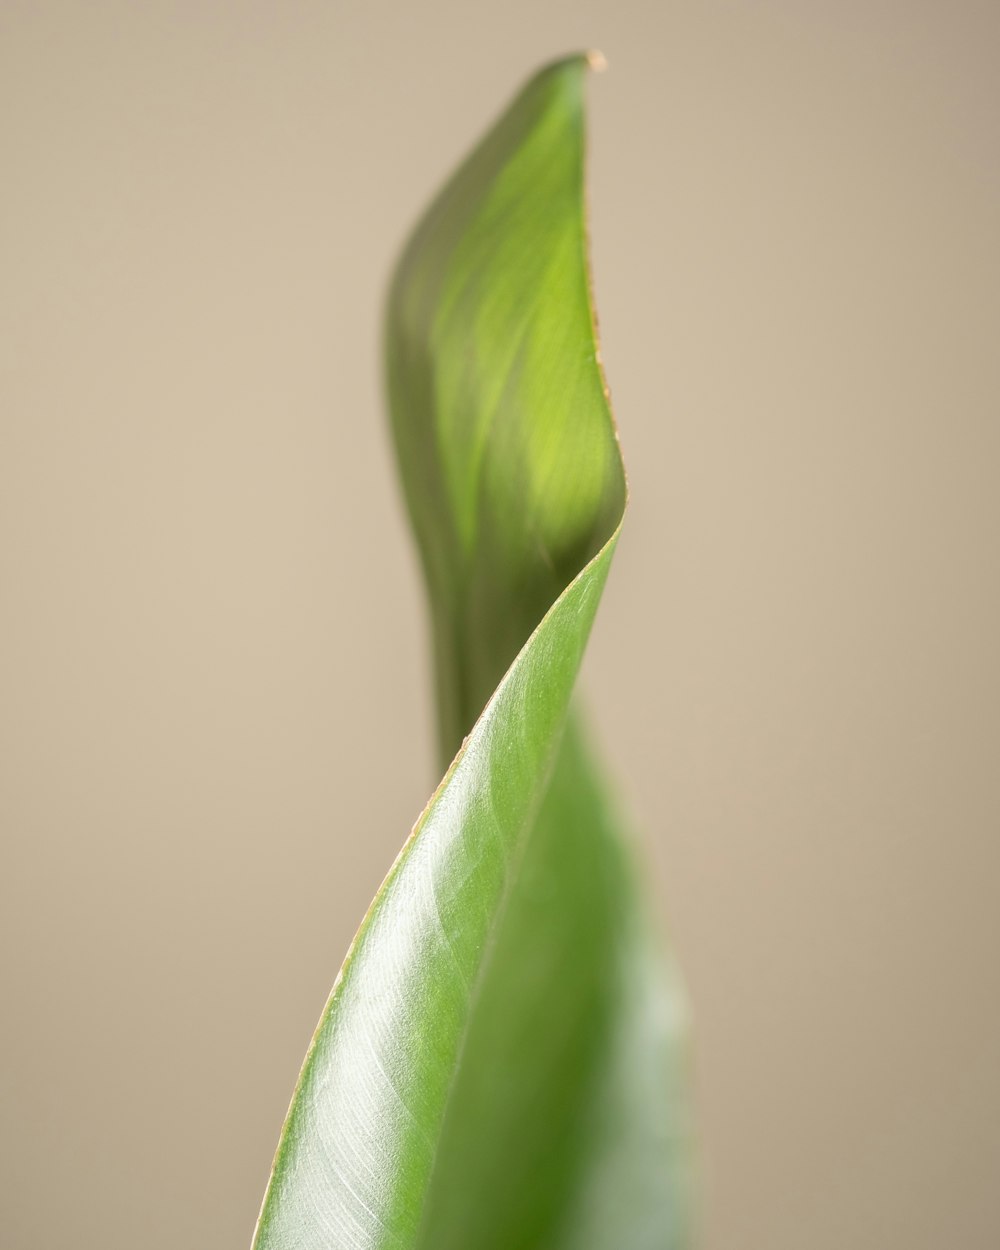 a close up of a green leaf with a brown background